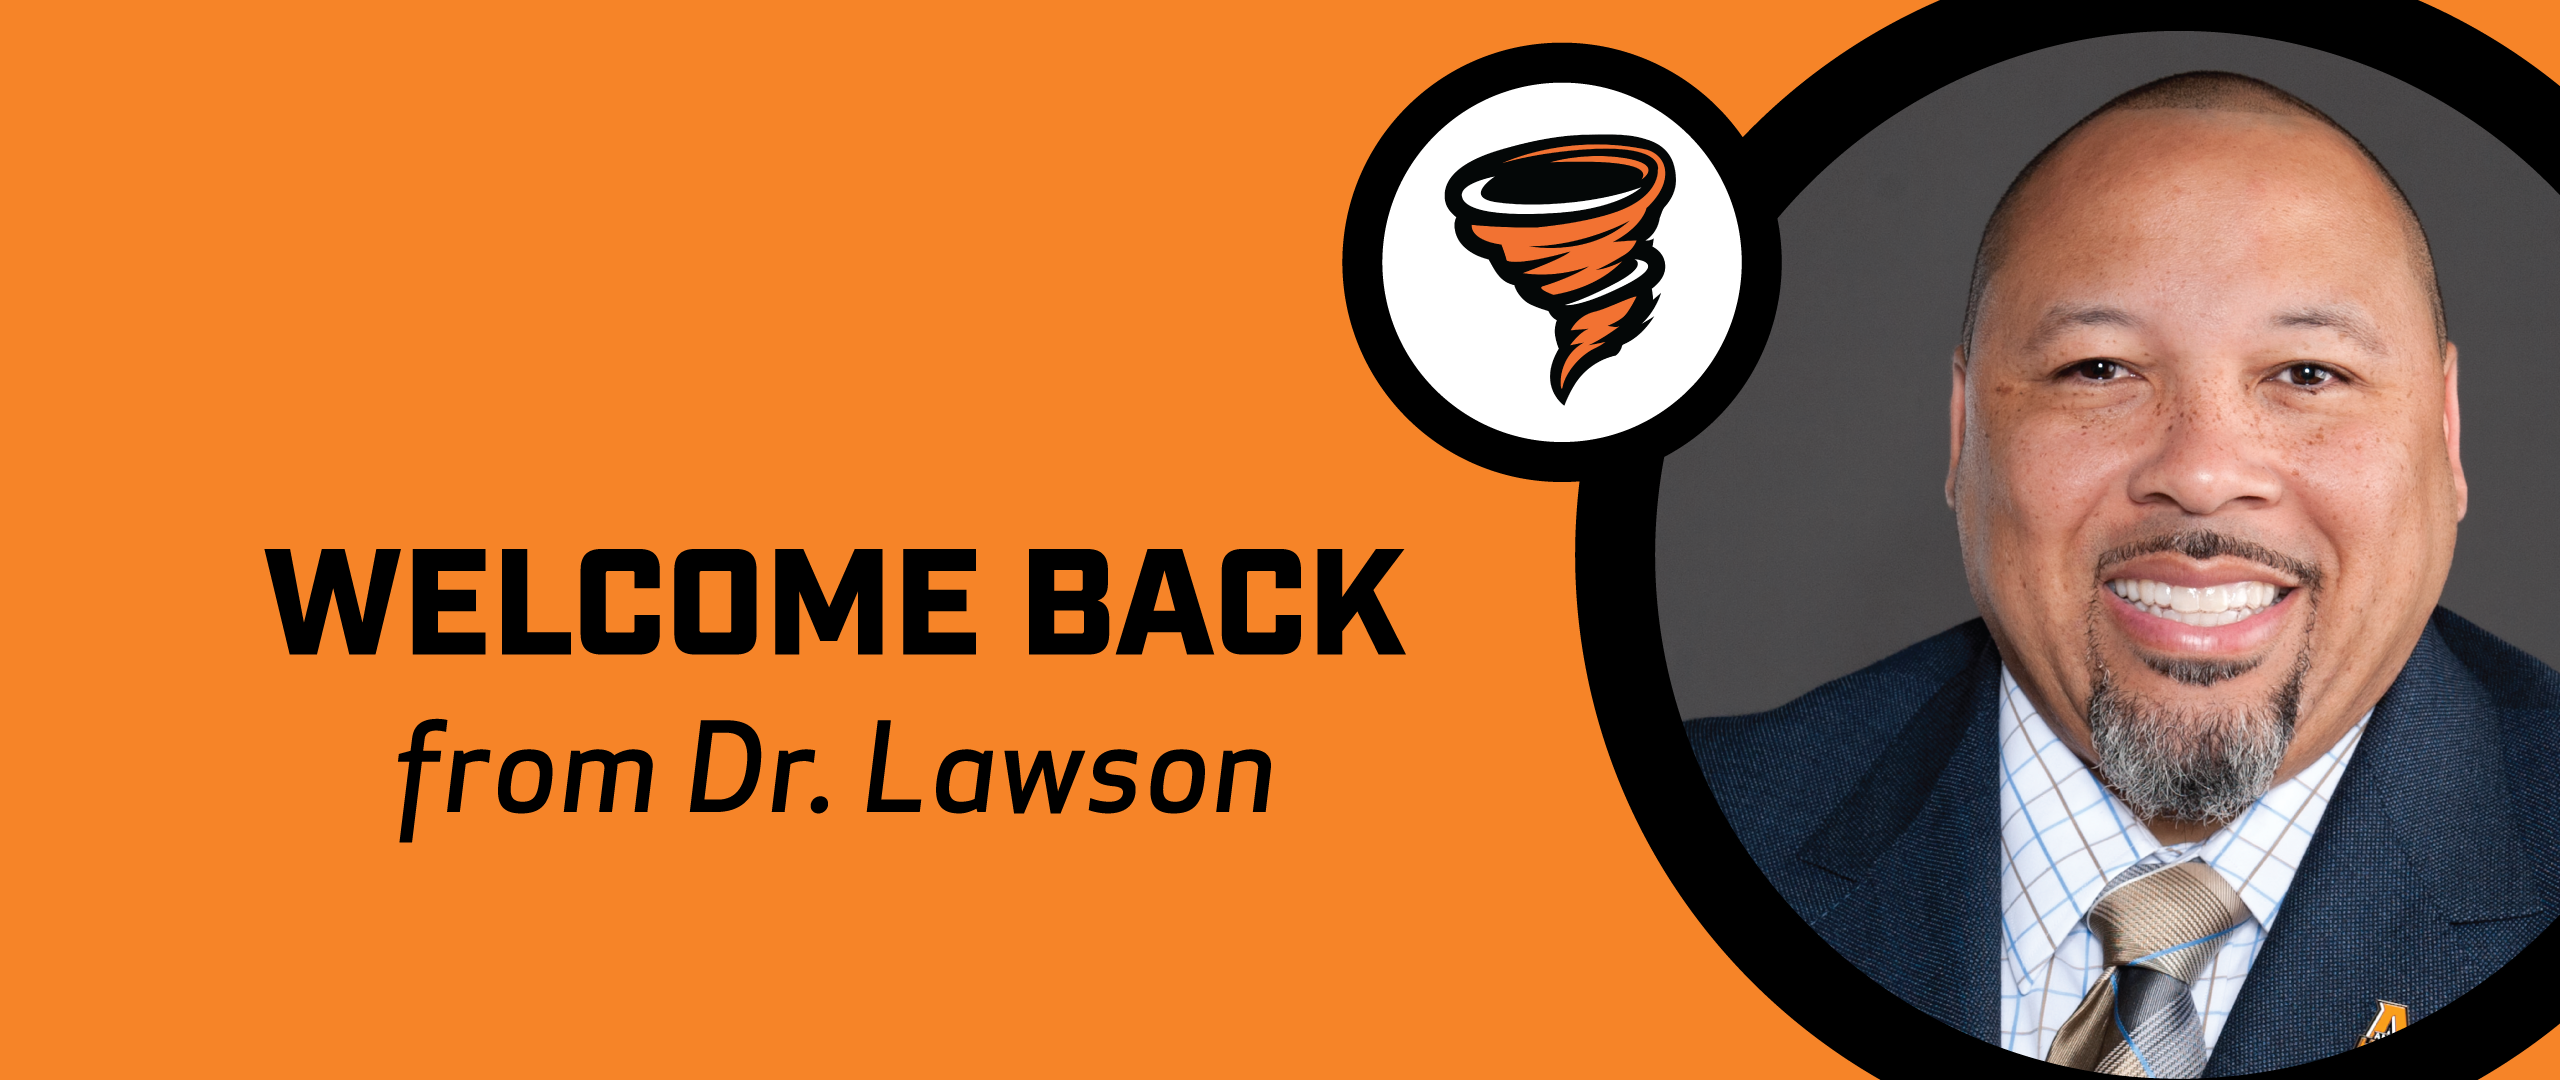 Welcome Back To An Amazing New School Year!